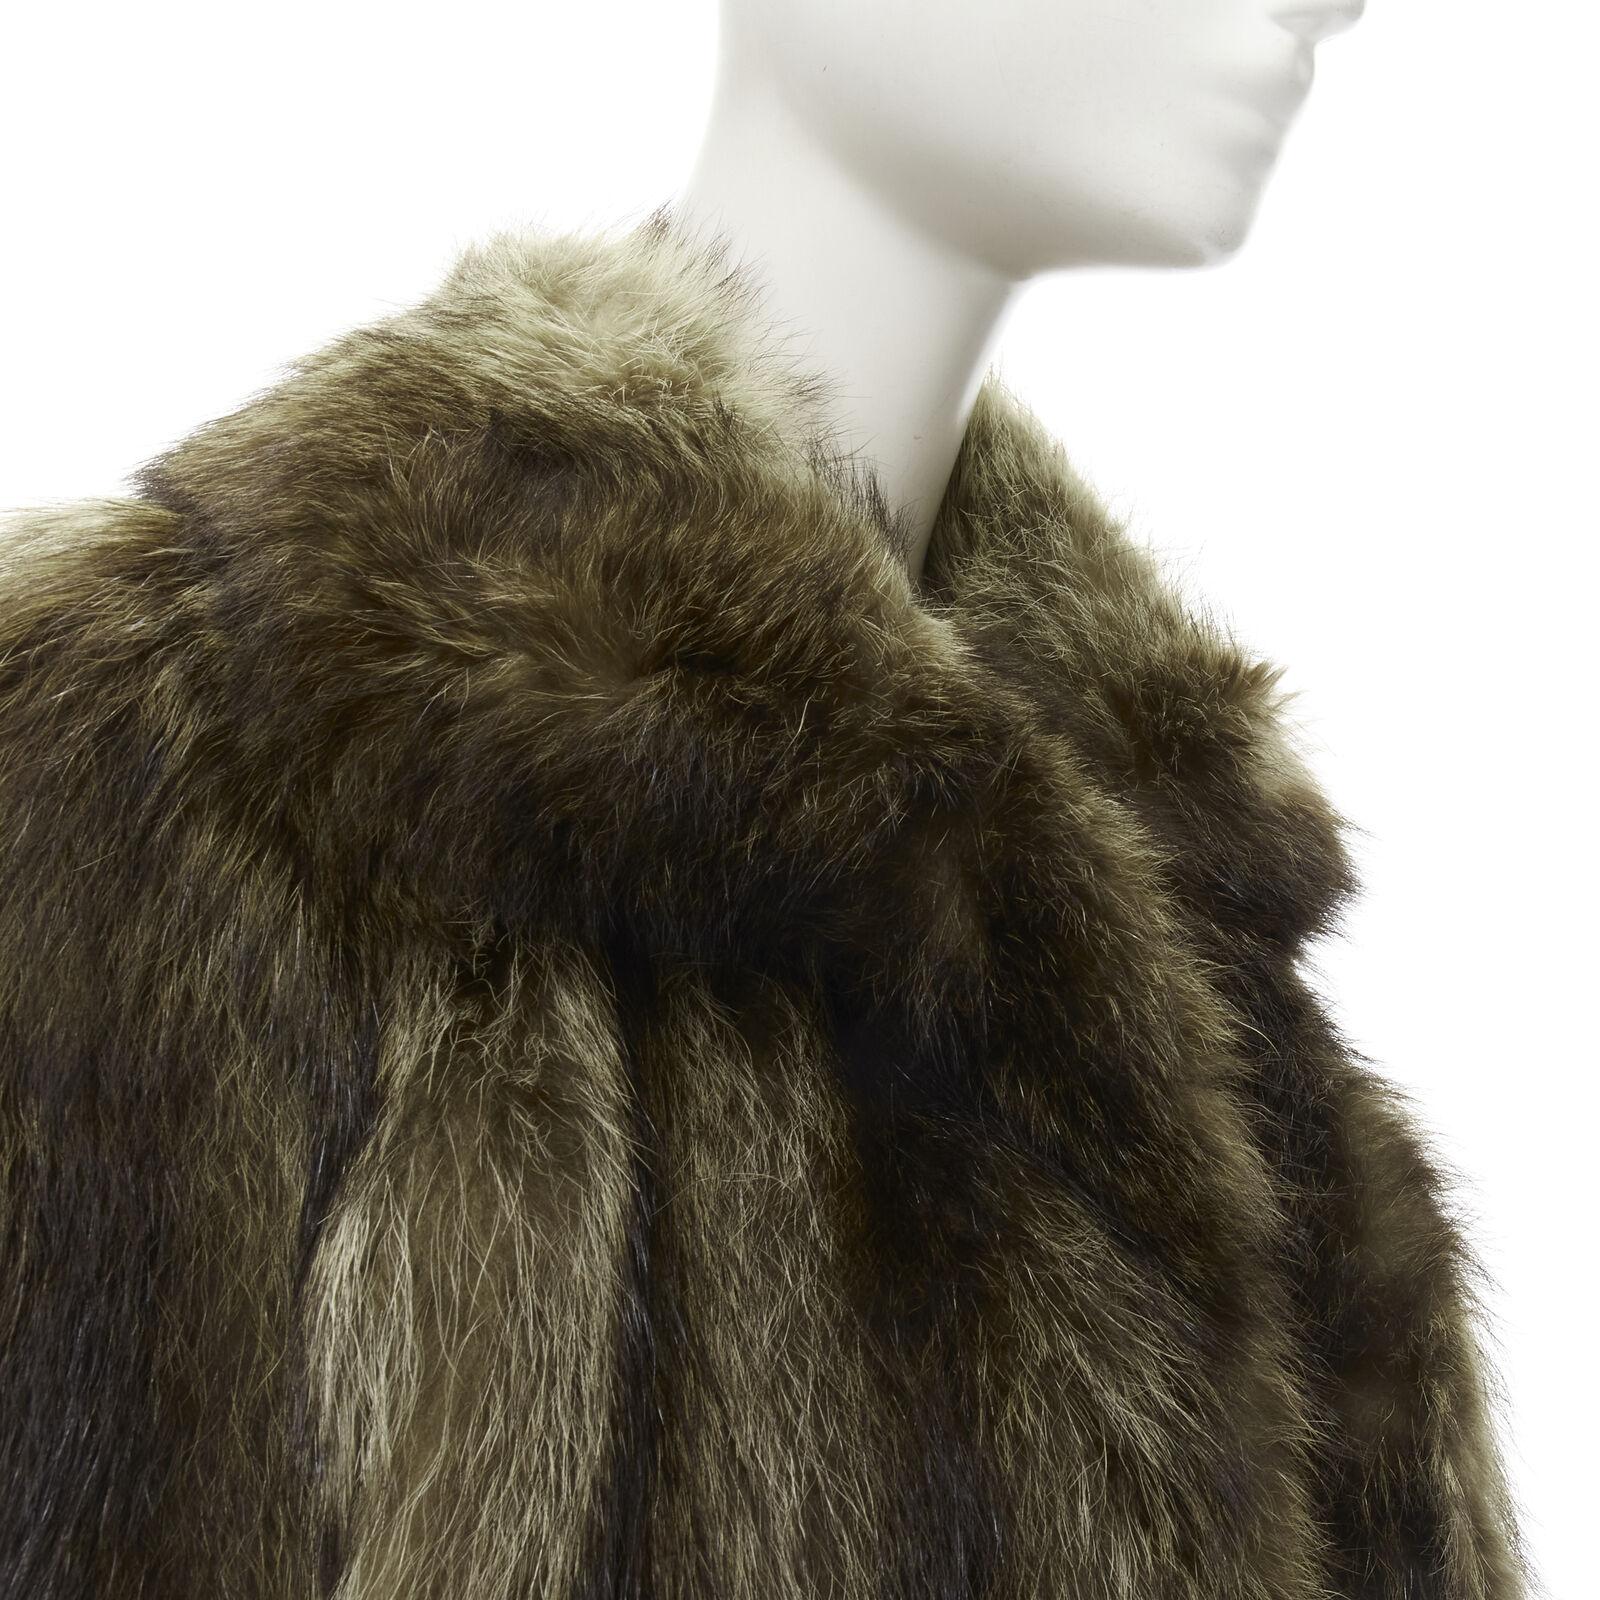 HURTIQ brown fur long sleeve collar hook eye jacket coat
Reference: JECW/A00001
Brand: Hurtiq
Material: Fur
Color: Brown
Pattern: Solid
Closure: Hook & Eye
Lining: Fabric

CONDITION:
Condition: Very good, this item was pre-owned and is in very good